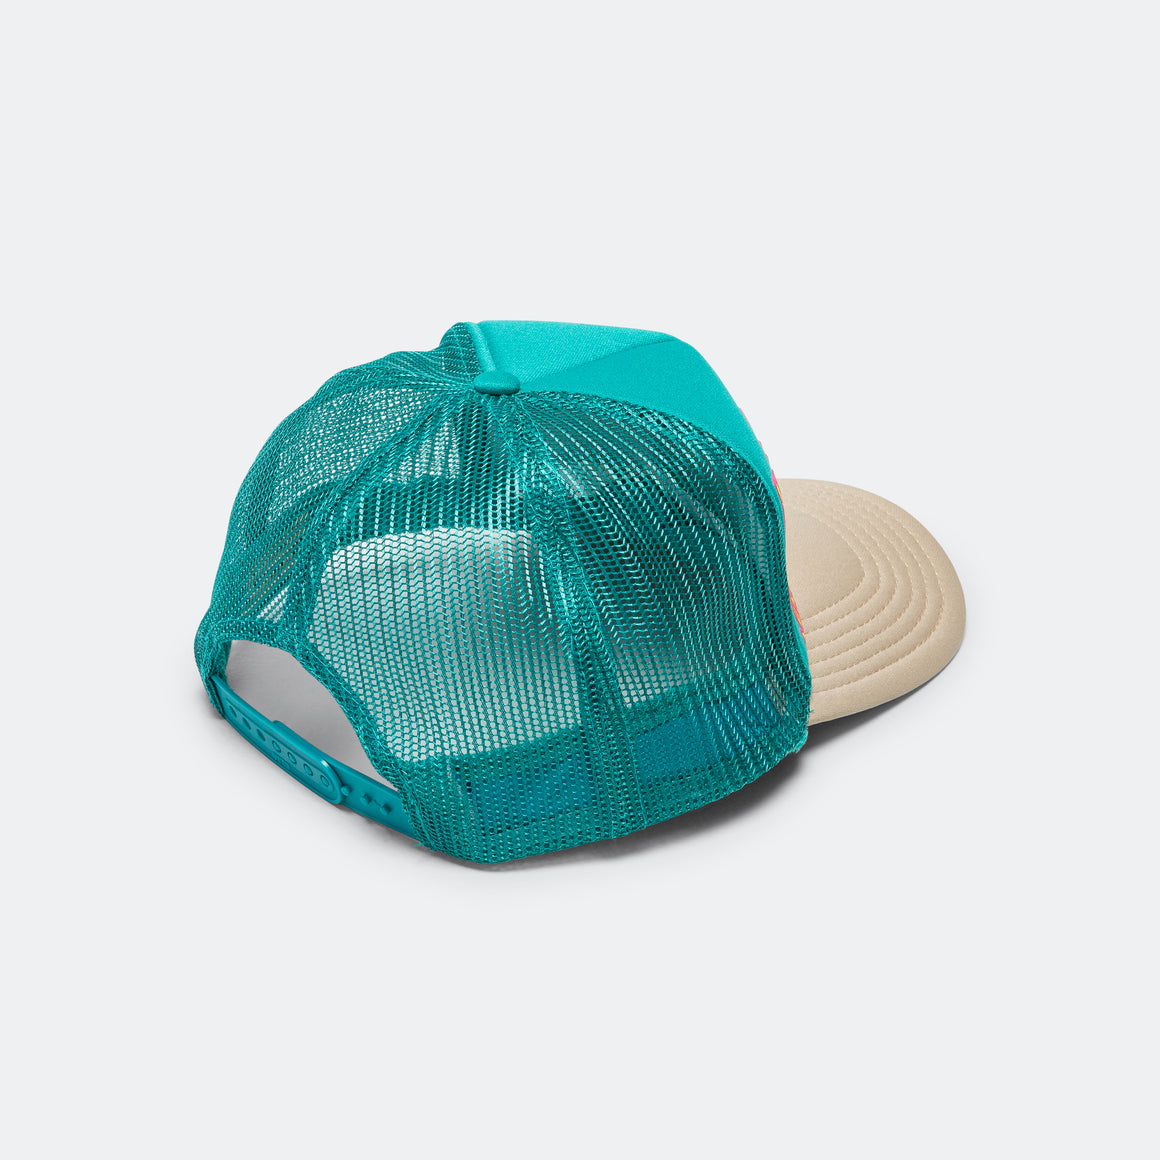 CONEYCOWBOWY Trucker CAP - Turquoise x Beige